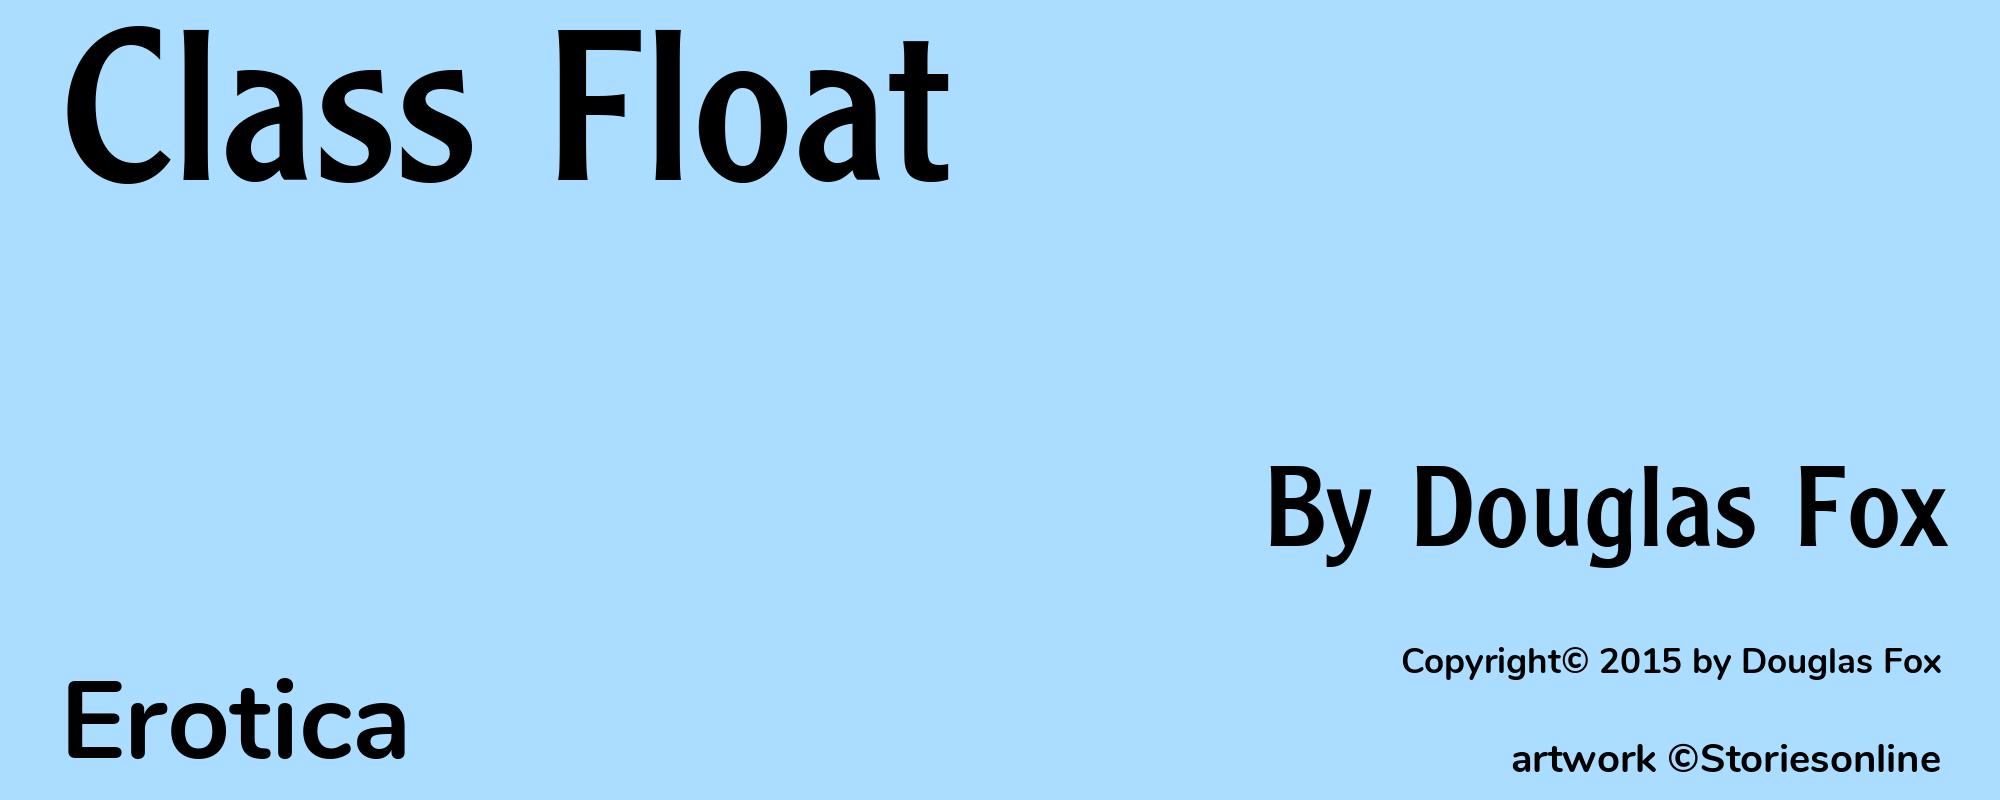 Class Float - Cover